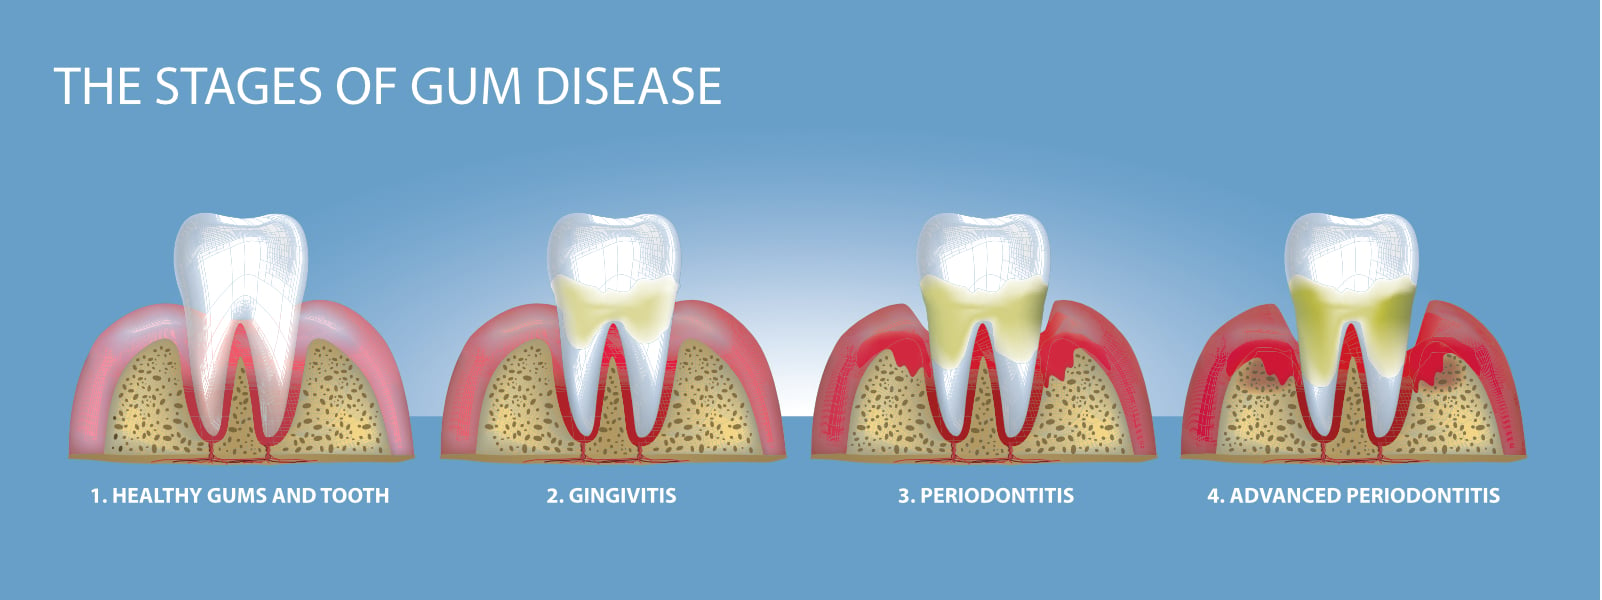 The Importance of Early Detection and Treatment of Gum Disease